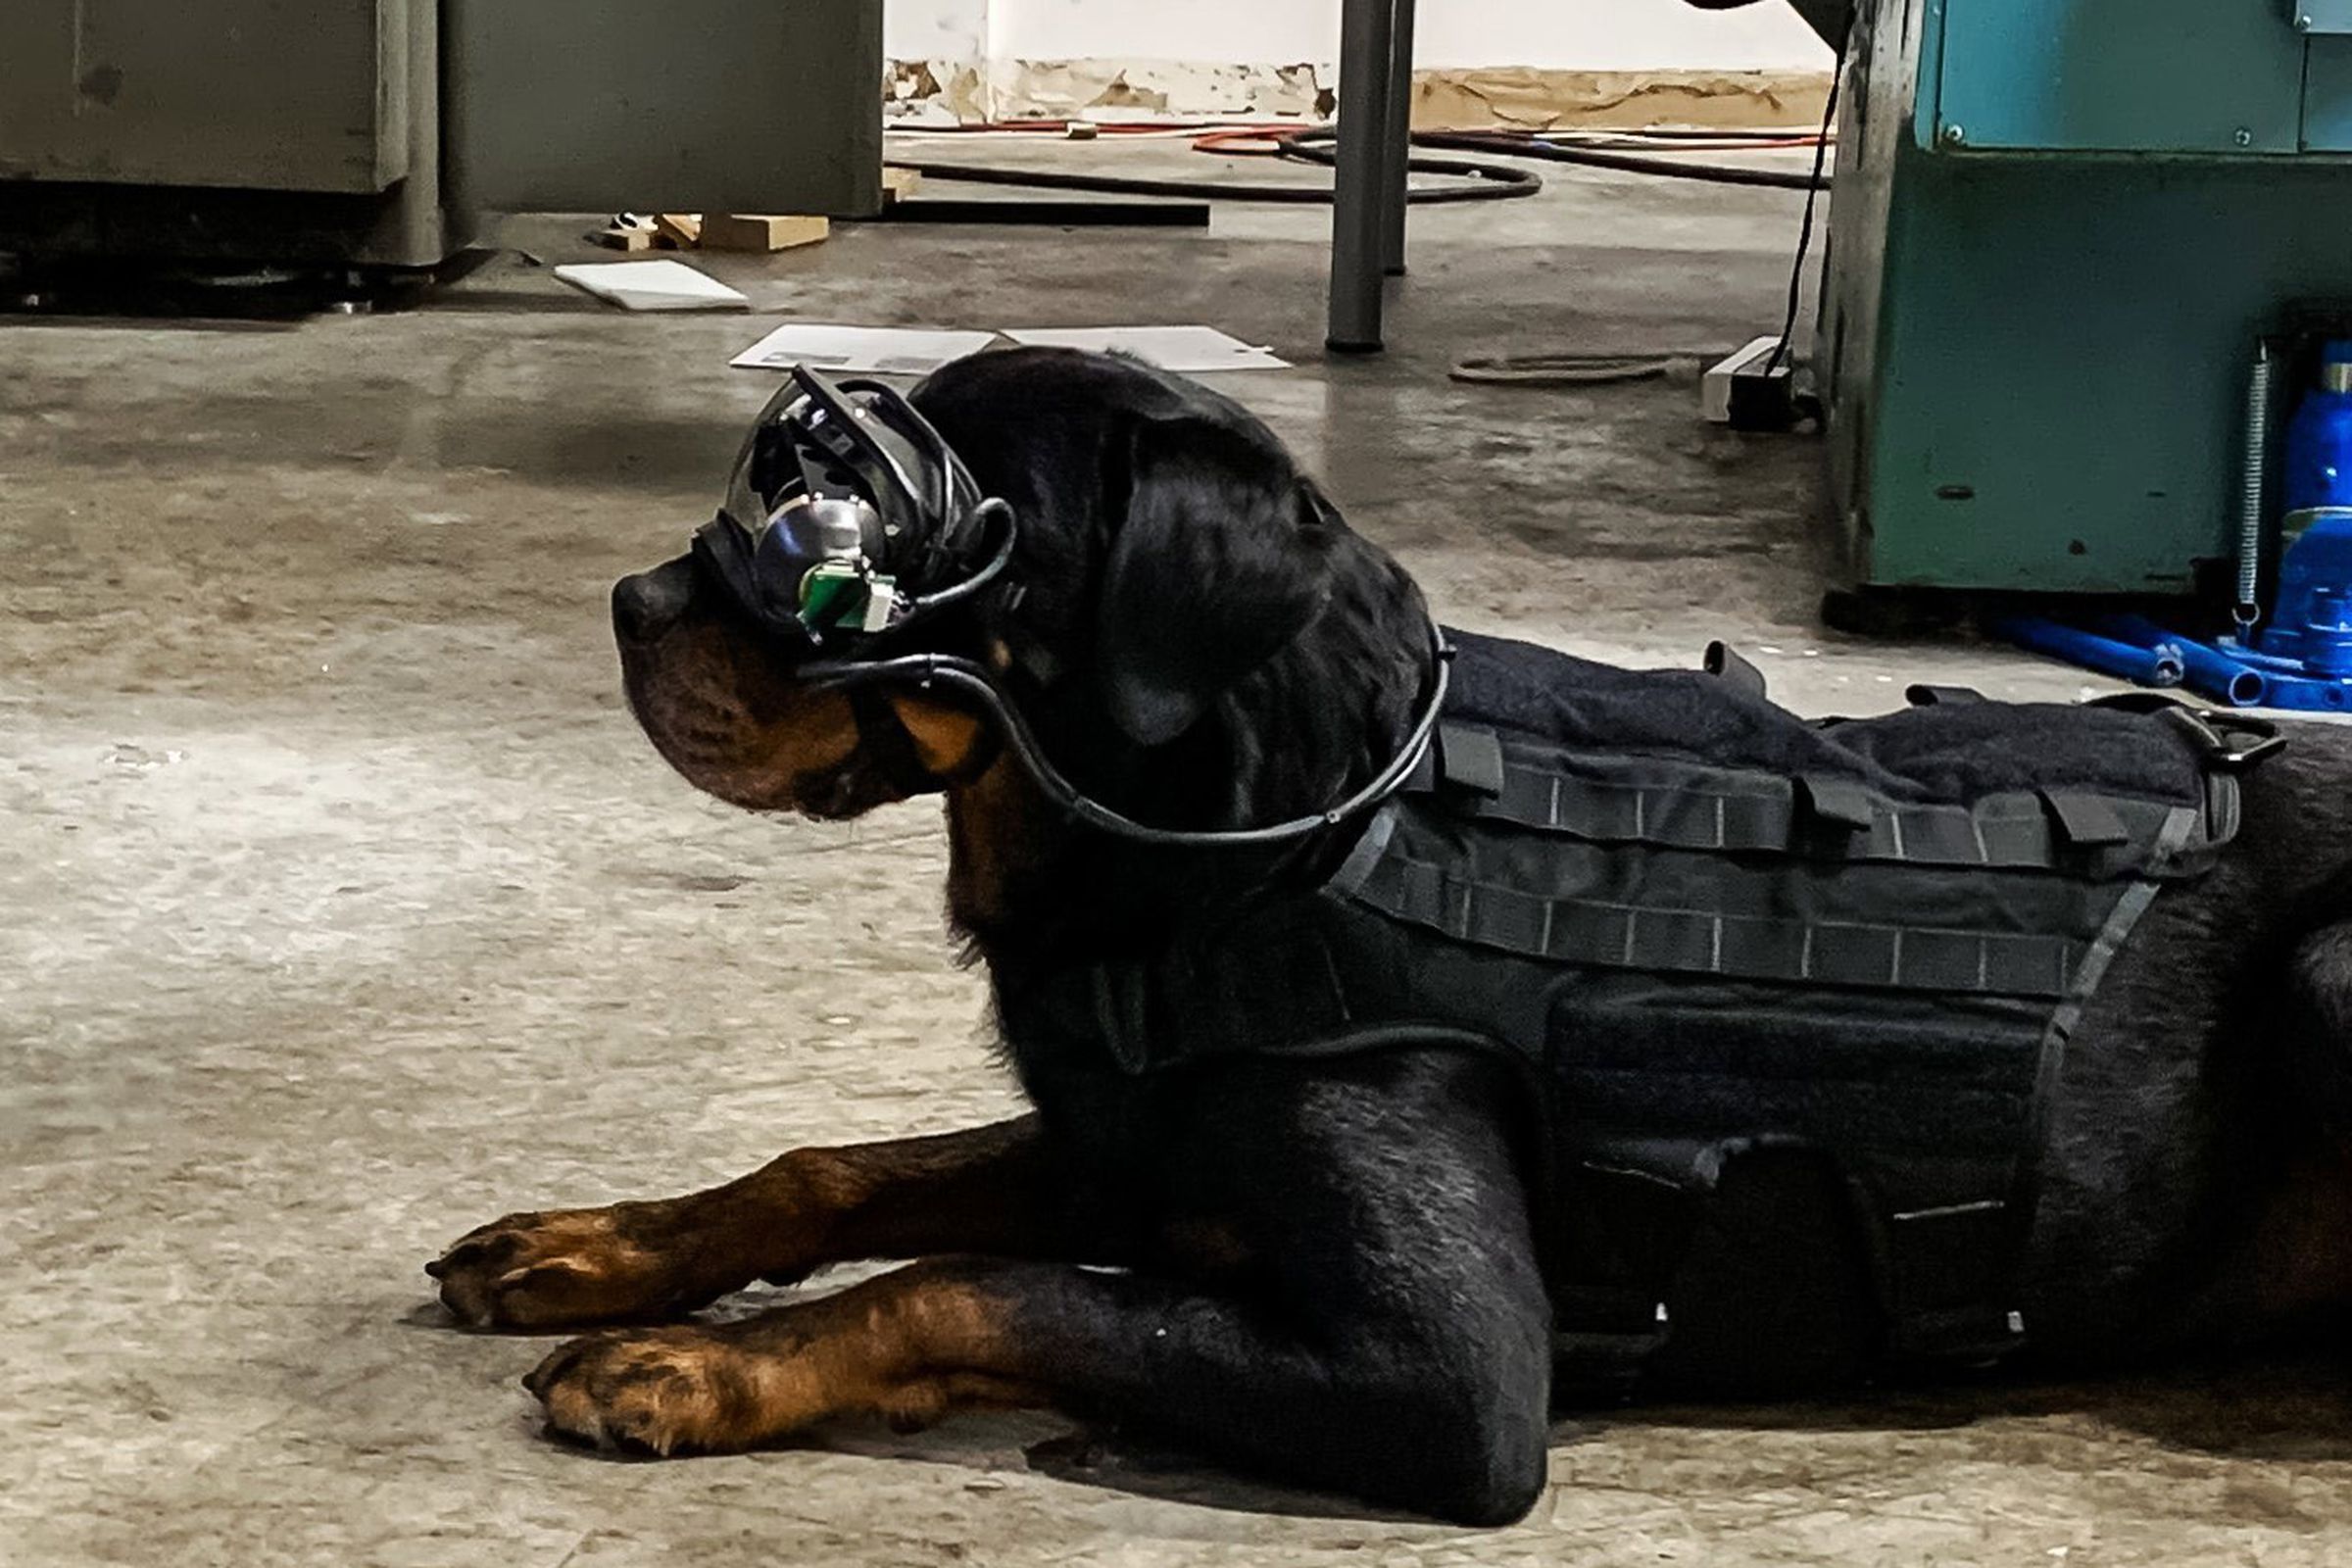 The AR goggles will allow military canine handlers to issue commands remotely. 